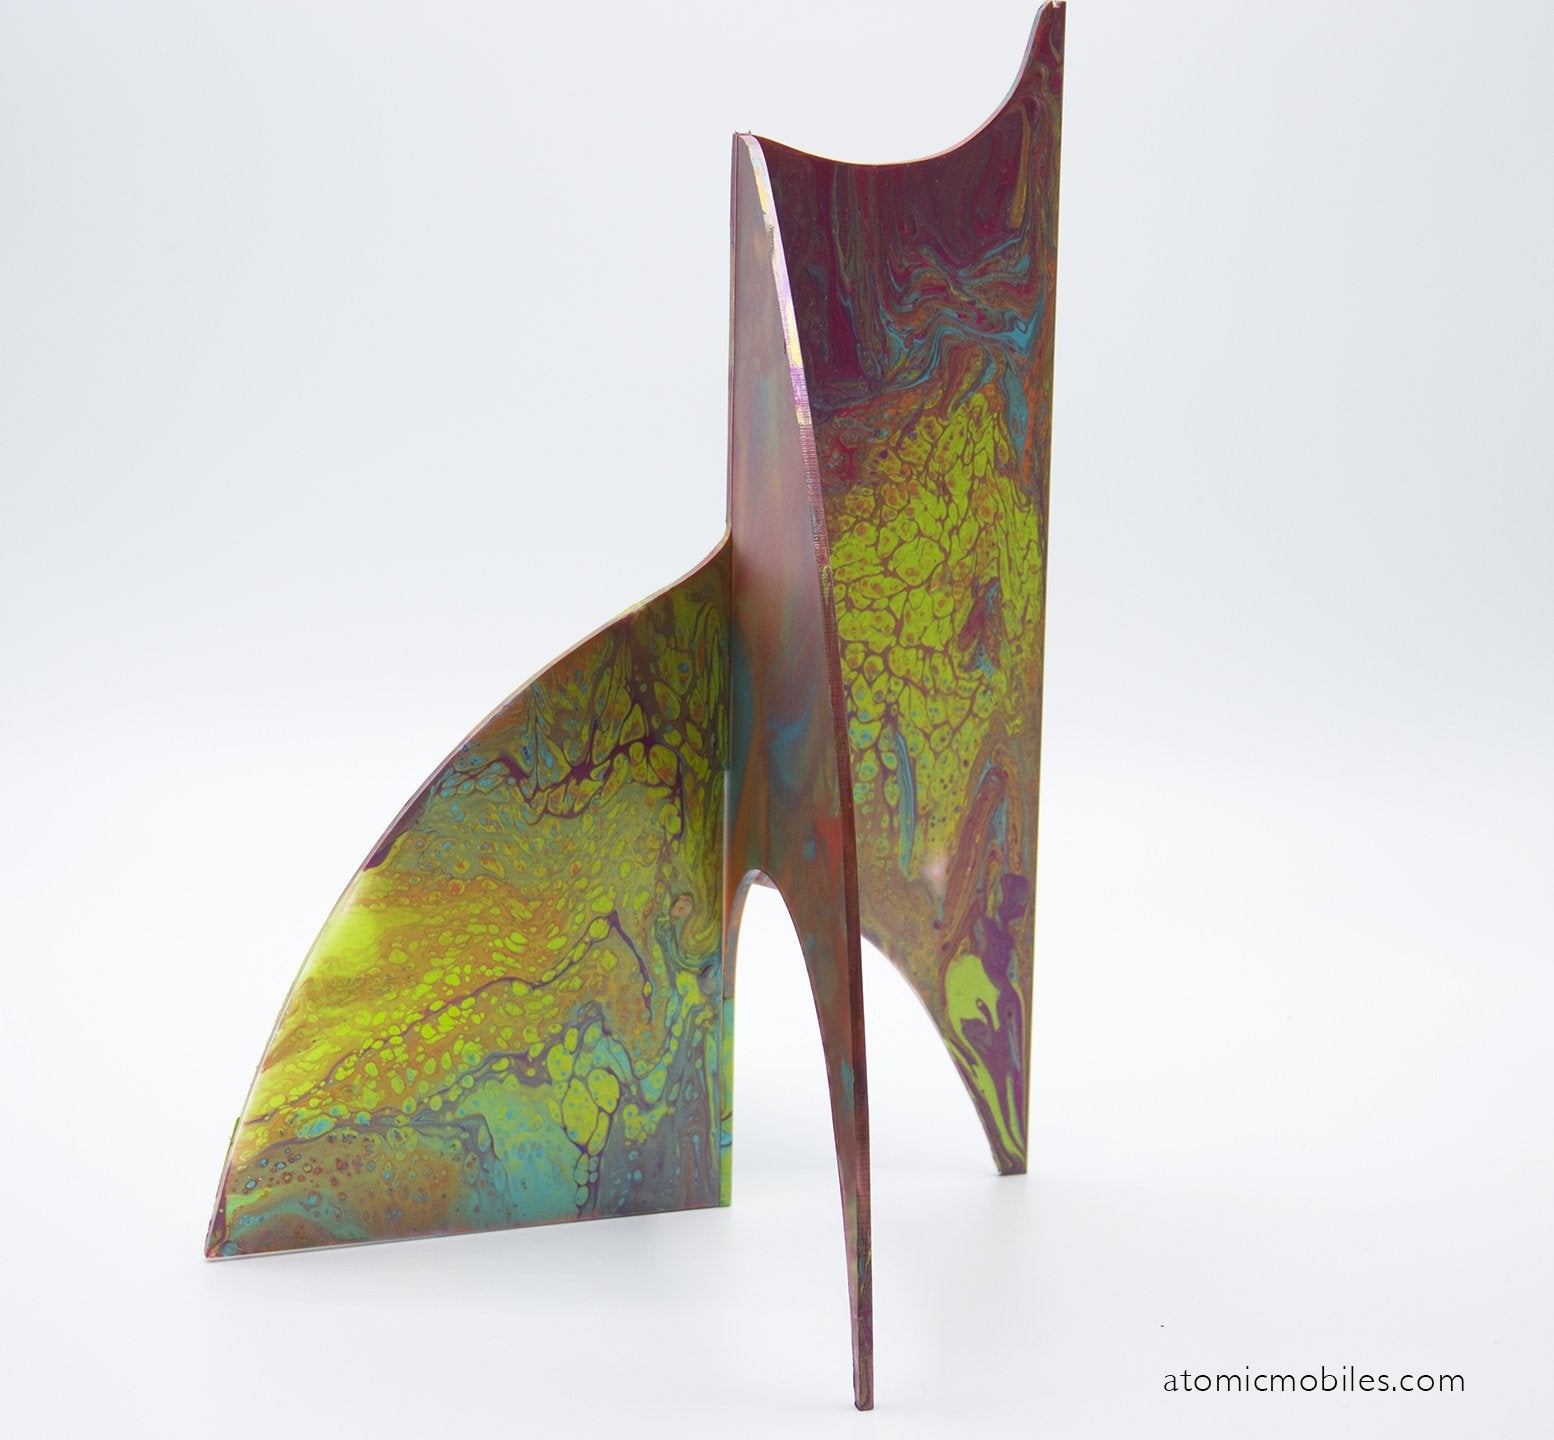 Luminescent lime, blue, red, yellow color kinetic modern art hand painted stabile sculpture by AtomicMobiles.com